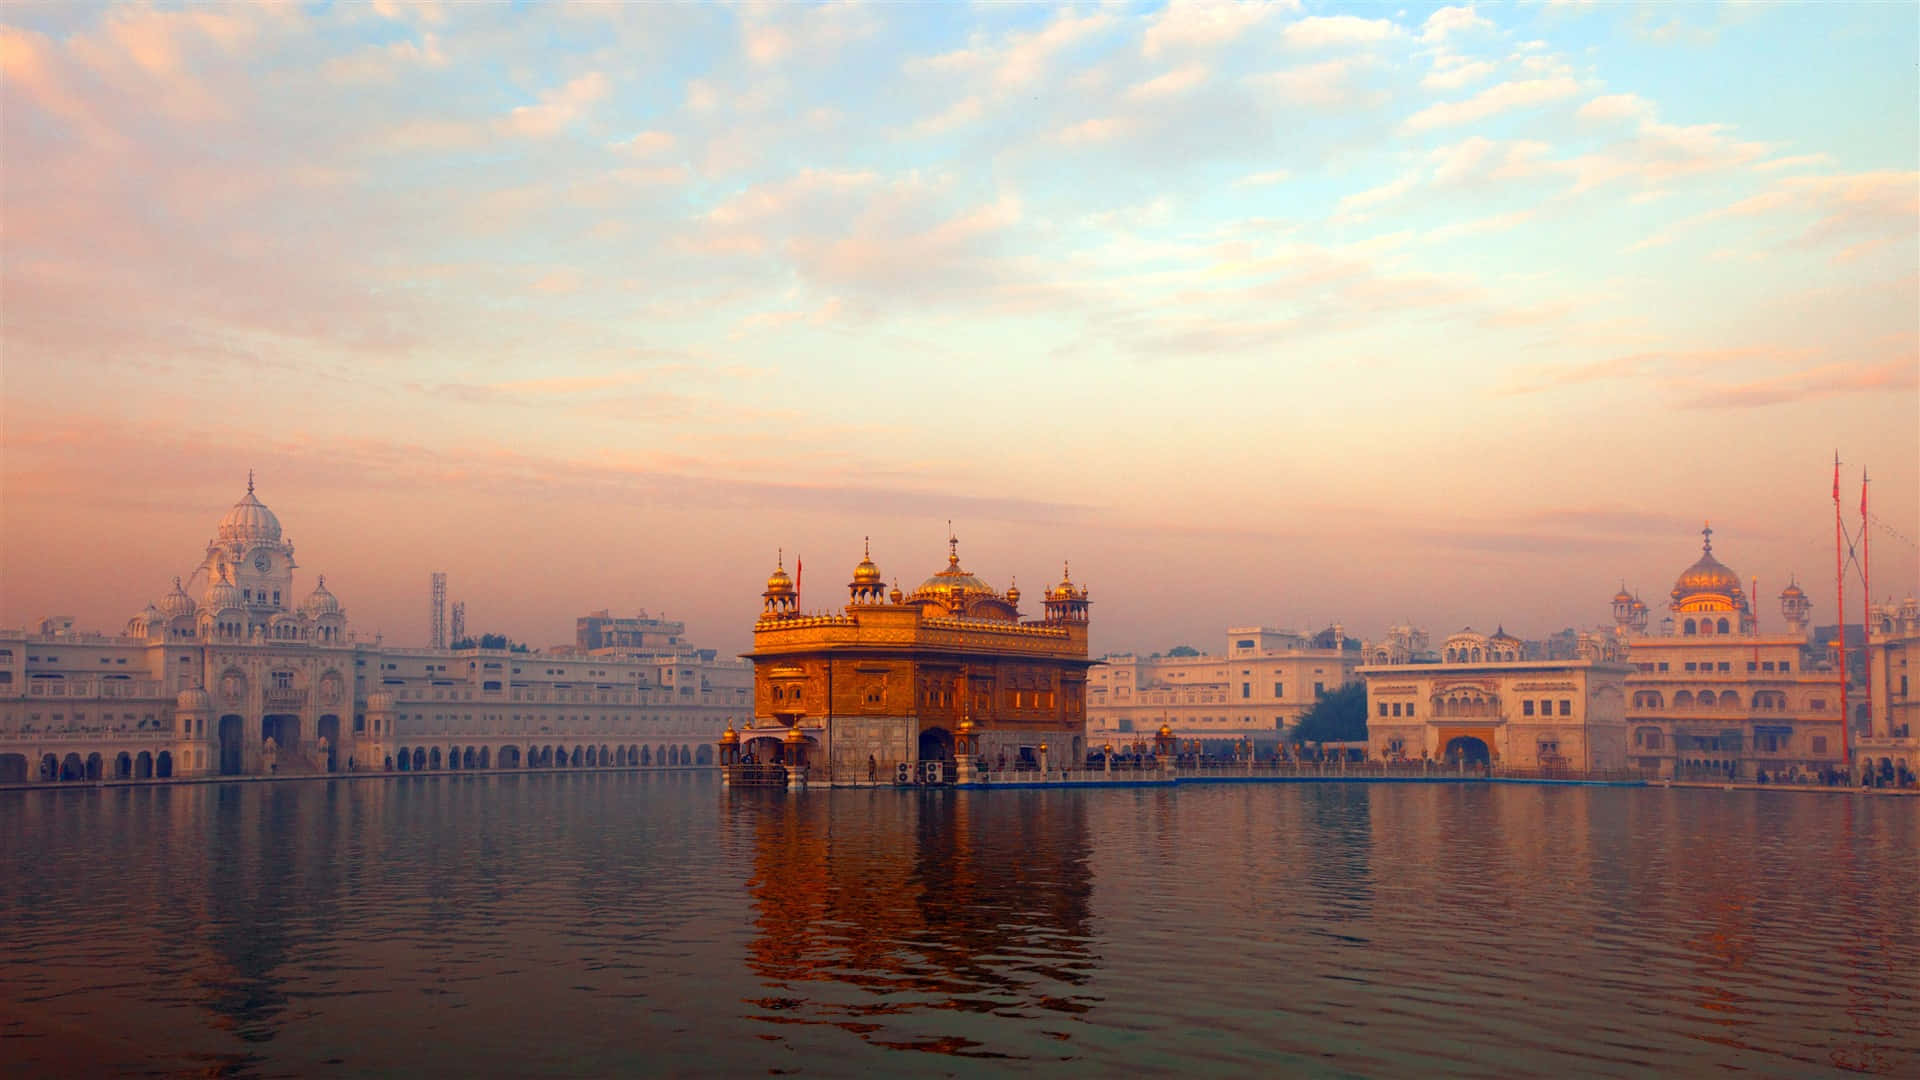 Golden Temple On Foggy Day Wallpaper